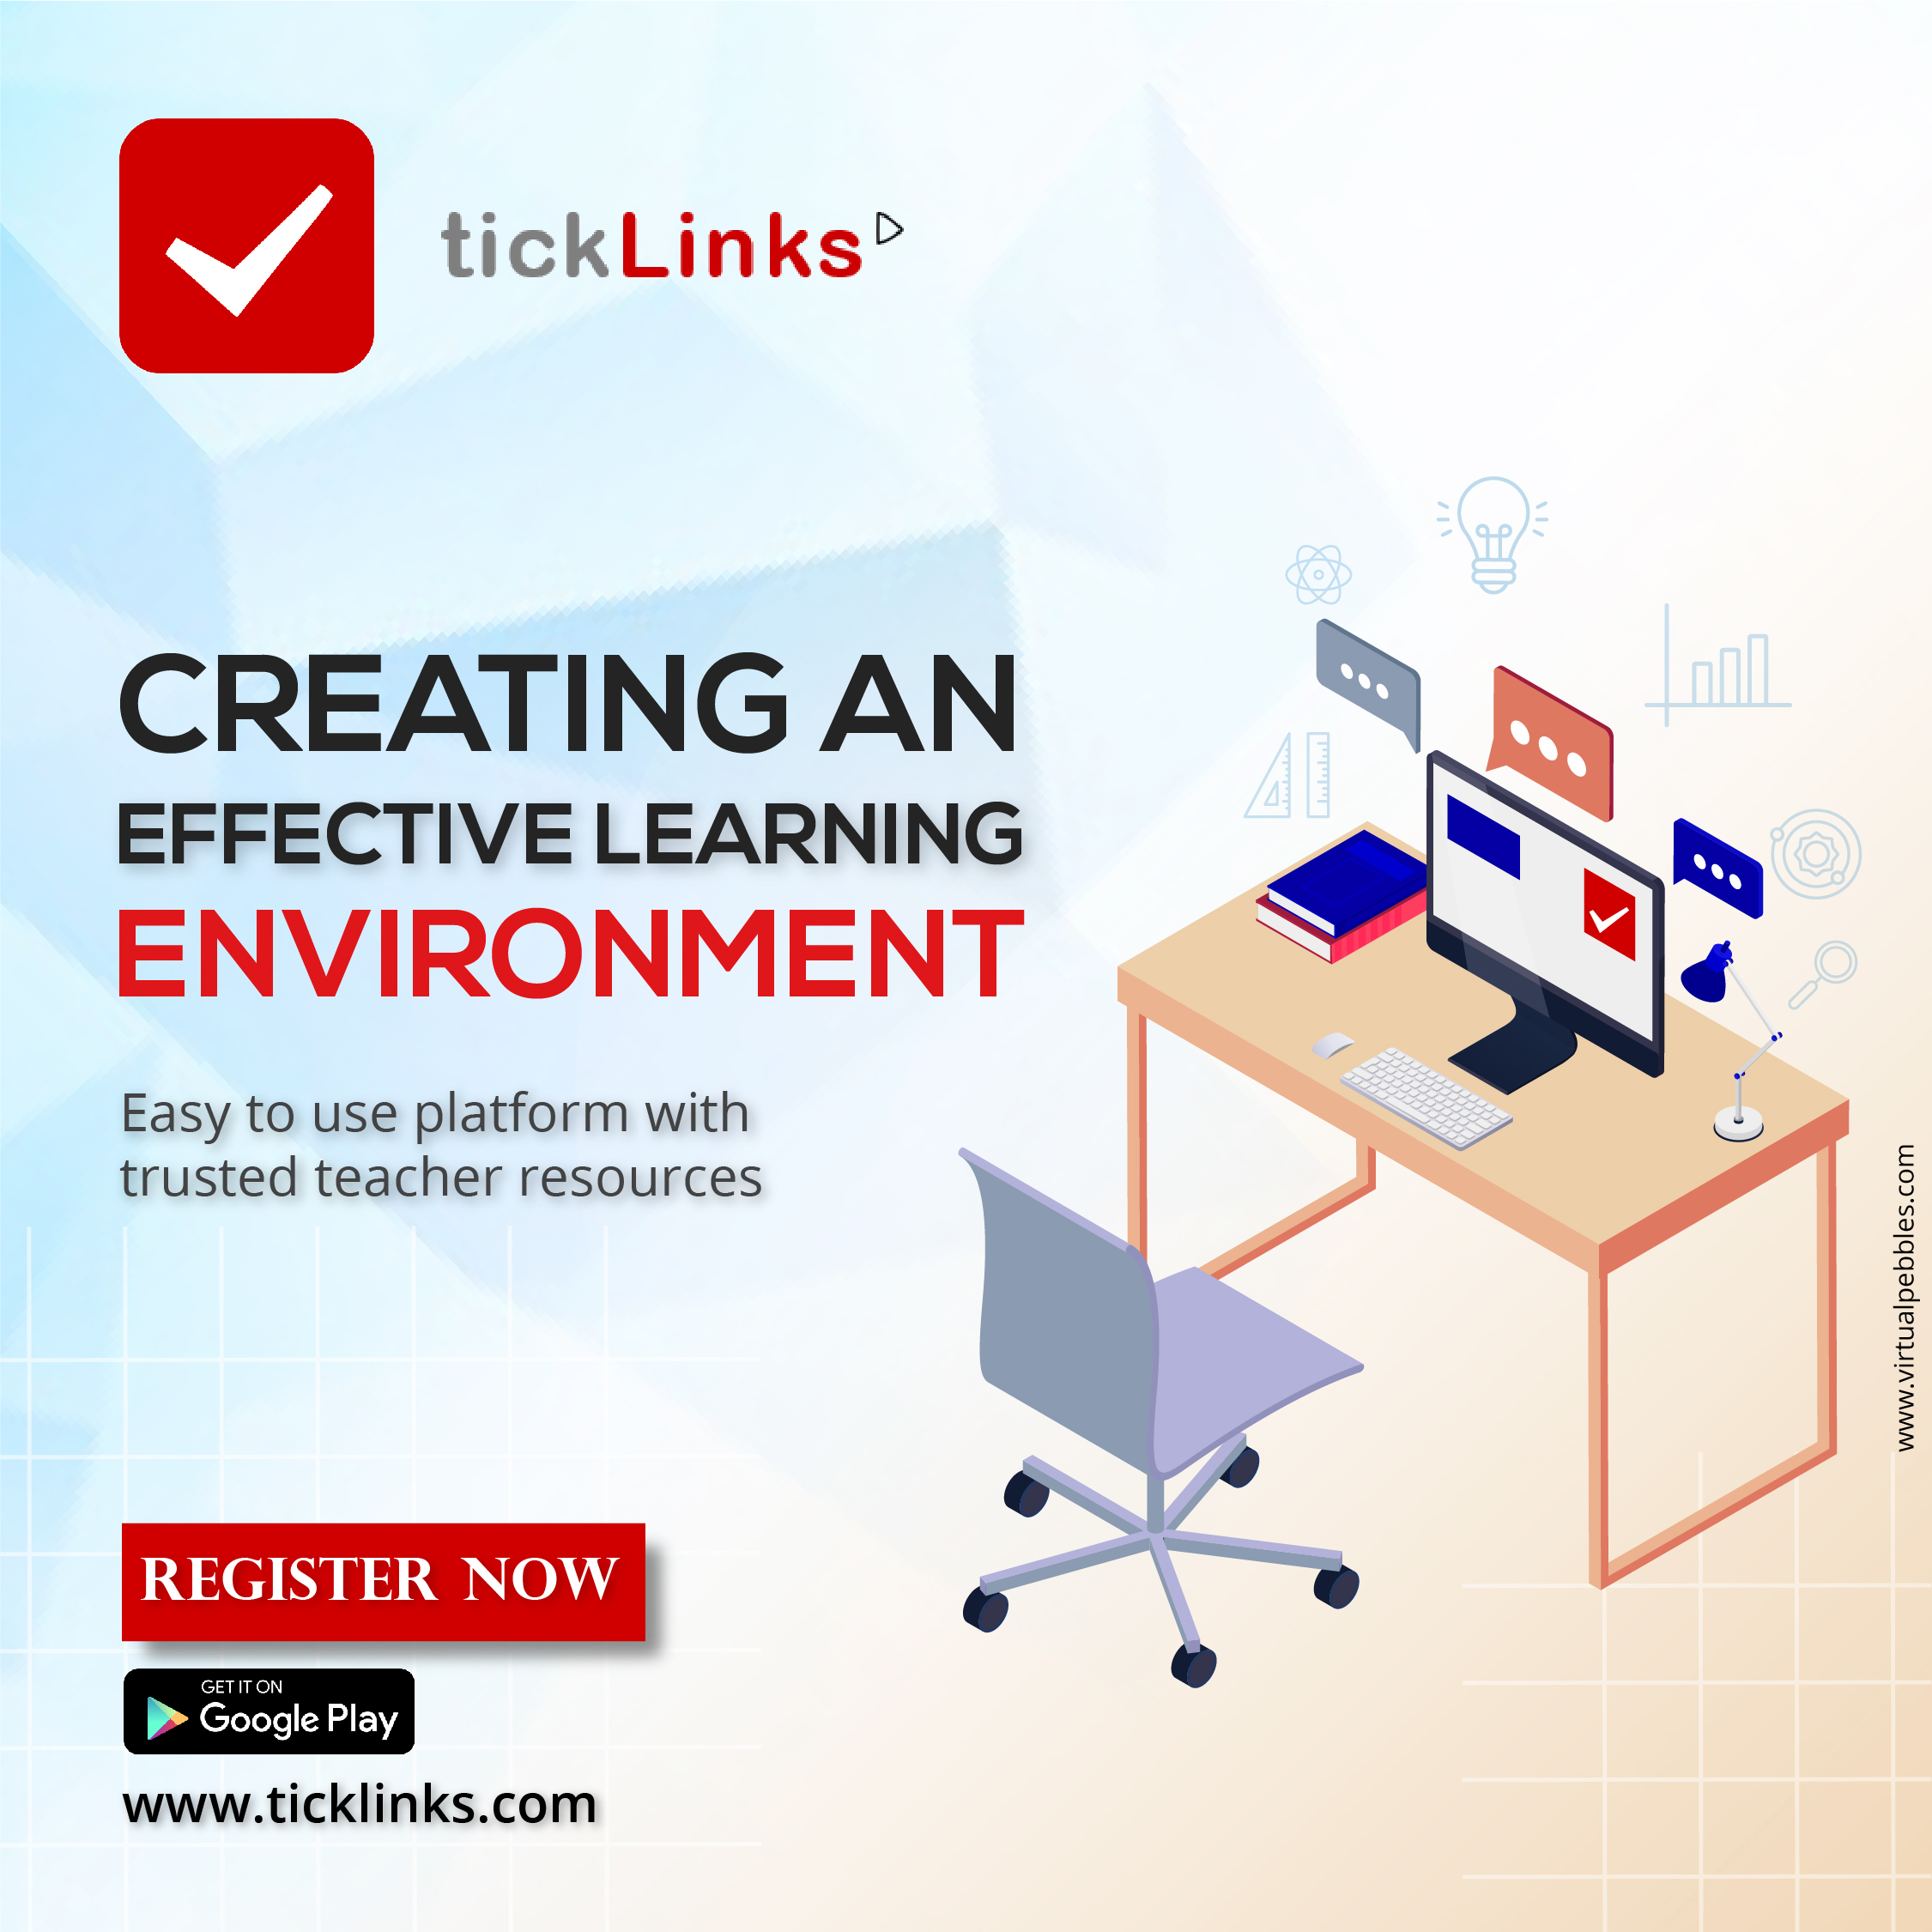 Online Free Tuition Classes - tickLinks Partner with Bharti Foundation